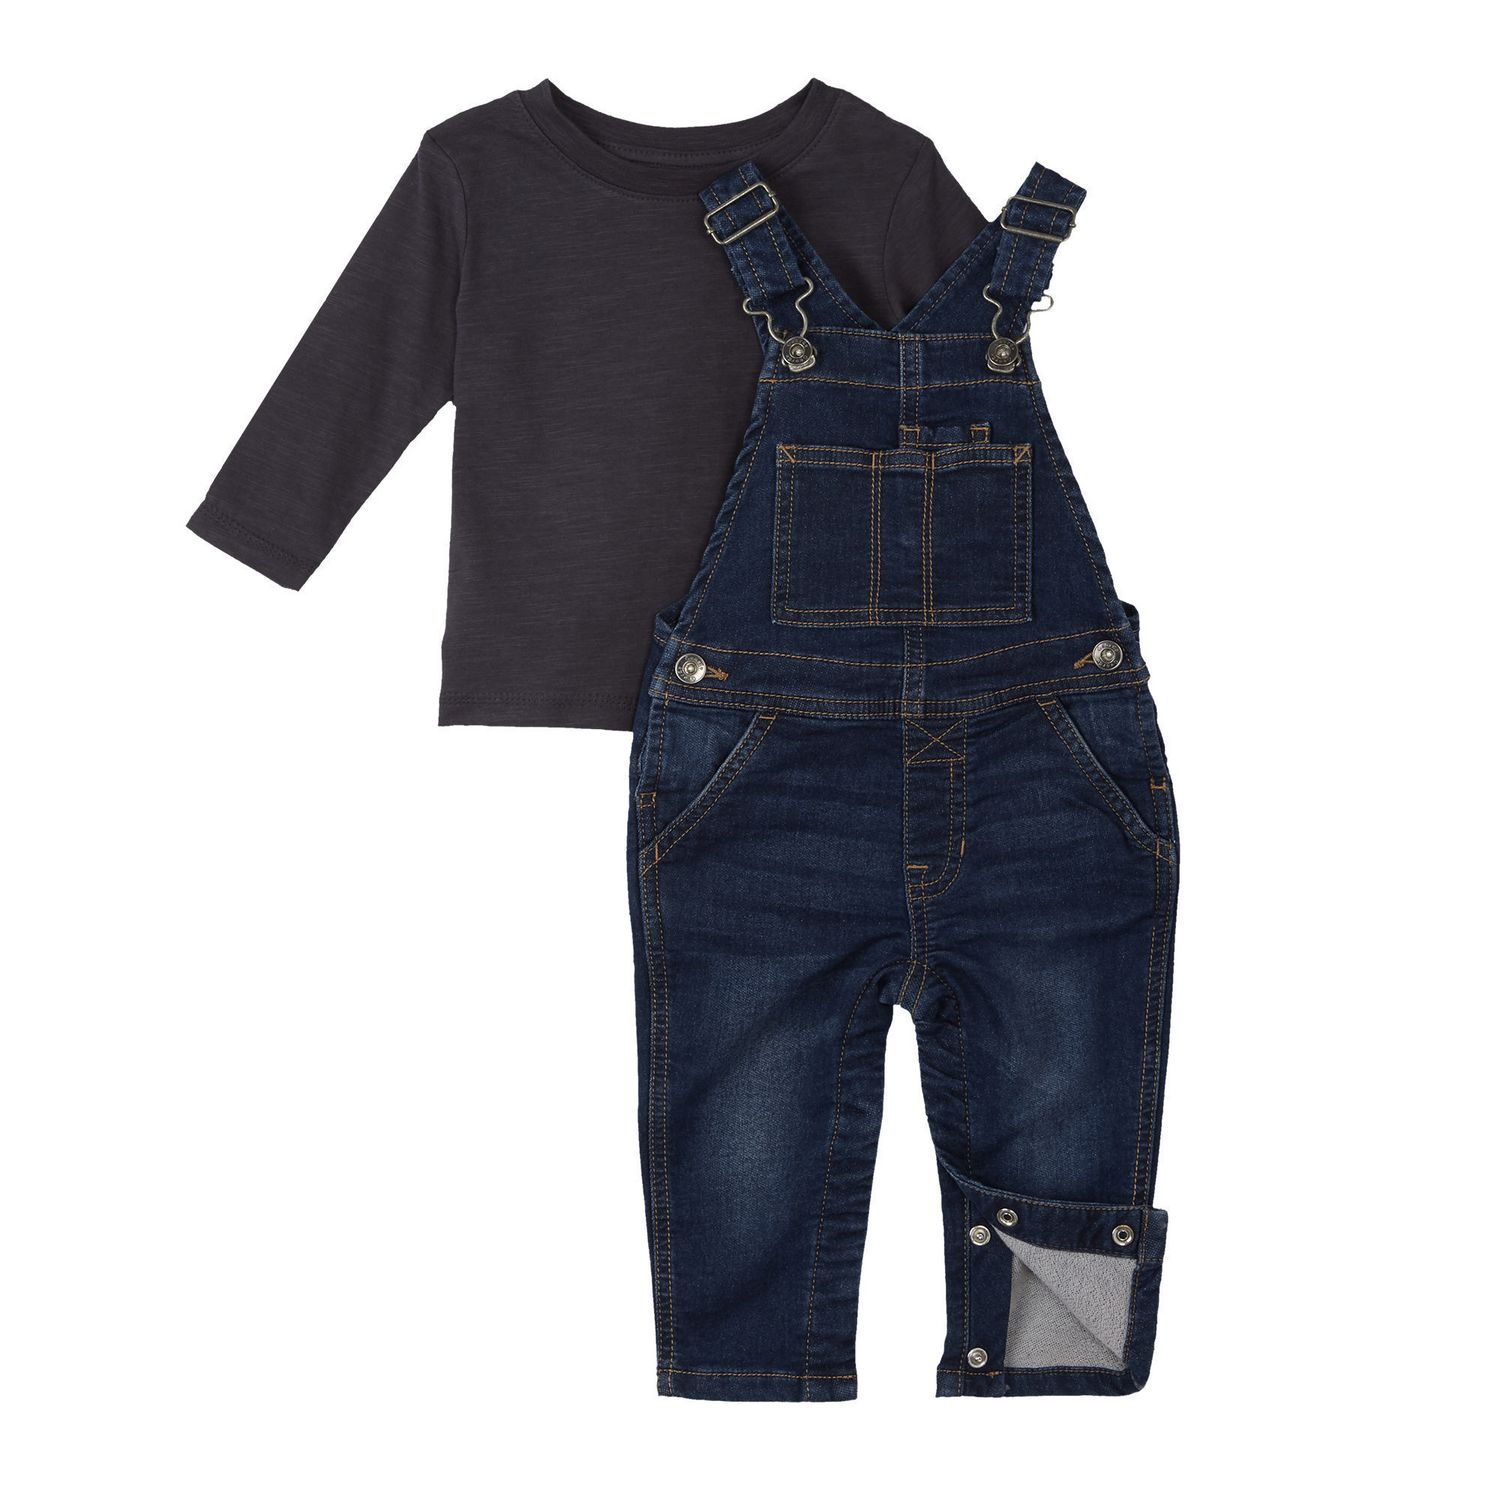 Boys' Clothes, Jeans, Jumpers & More